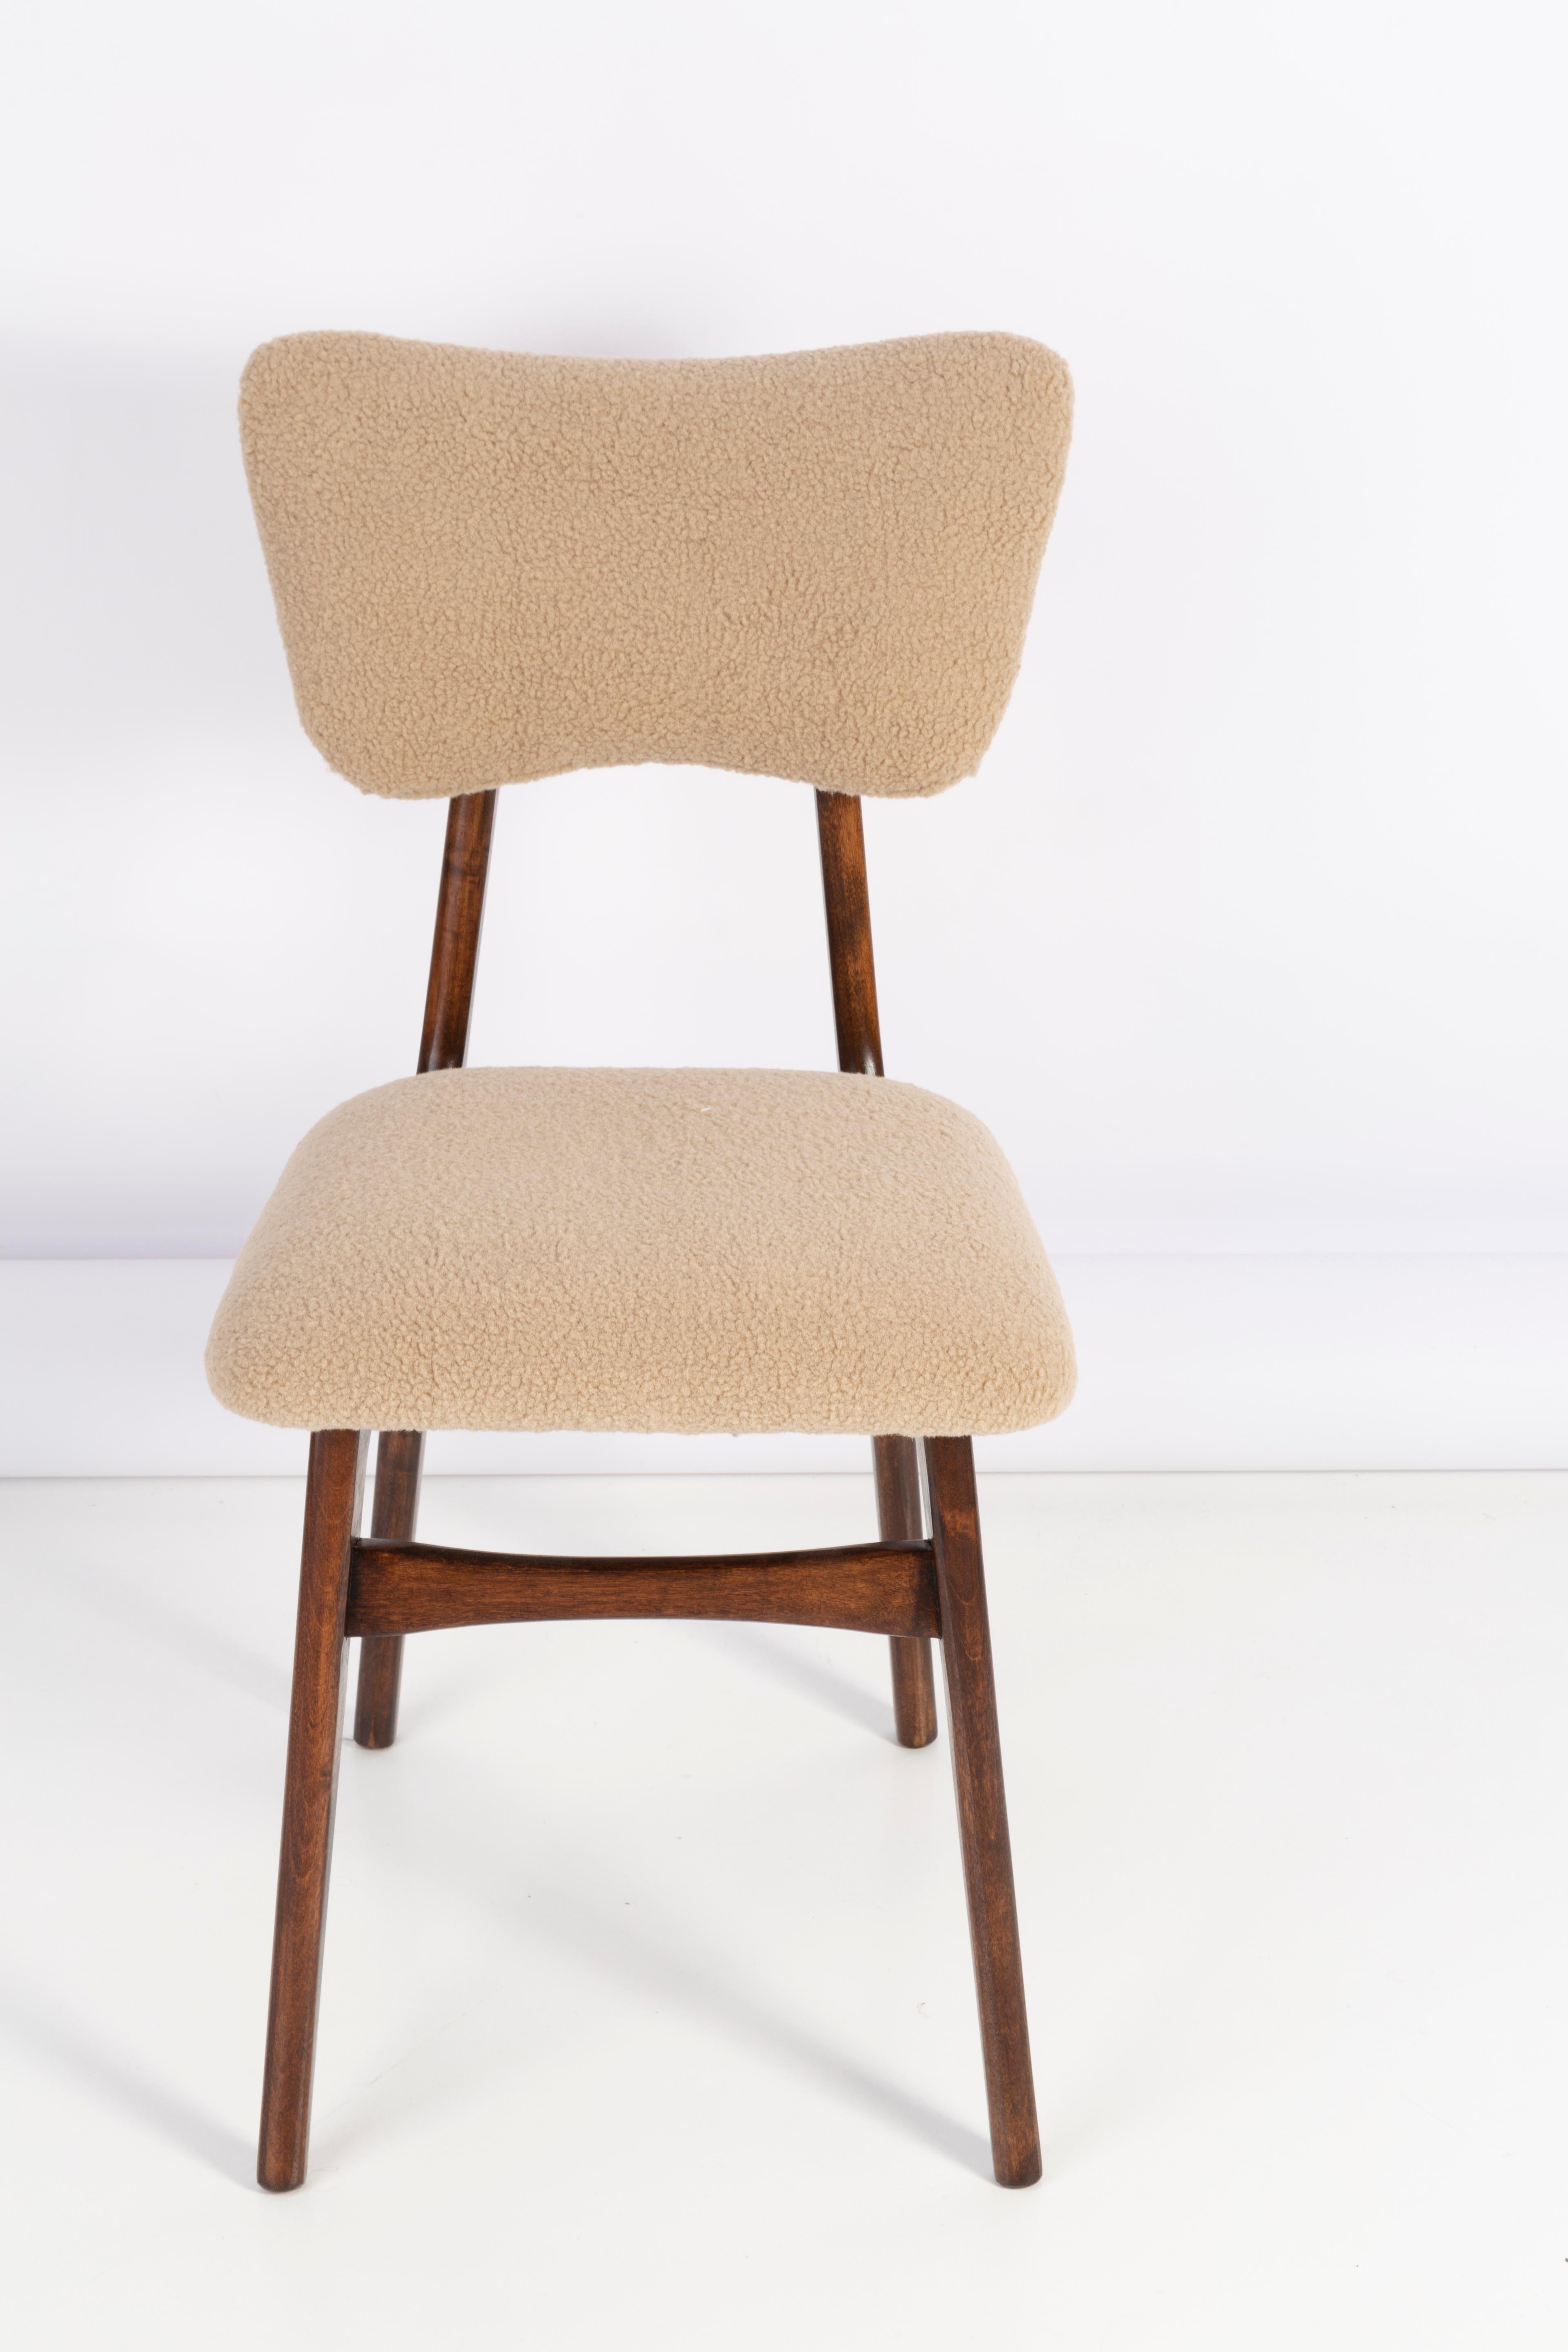 Set of Two 20th Century Camel Boucle Chairs, 1960s For Sale 7